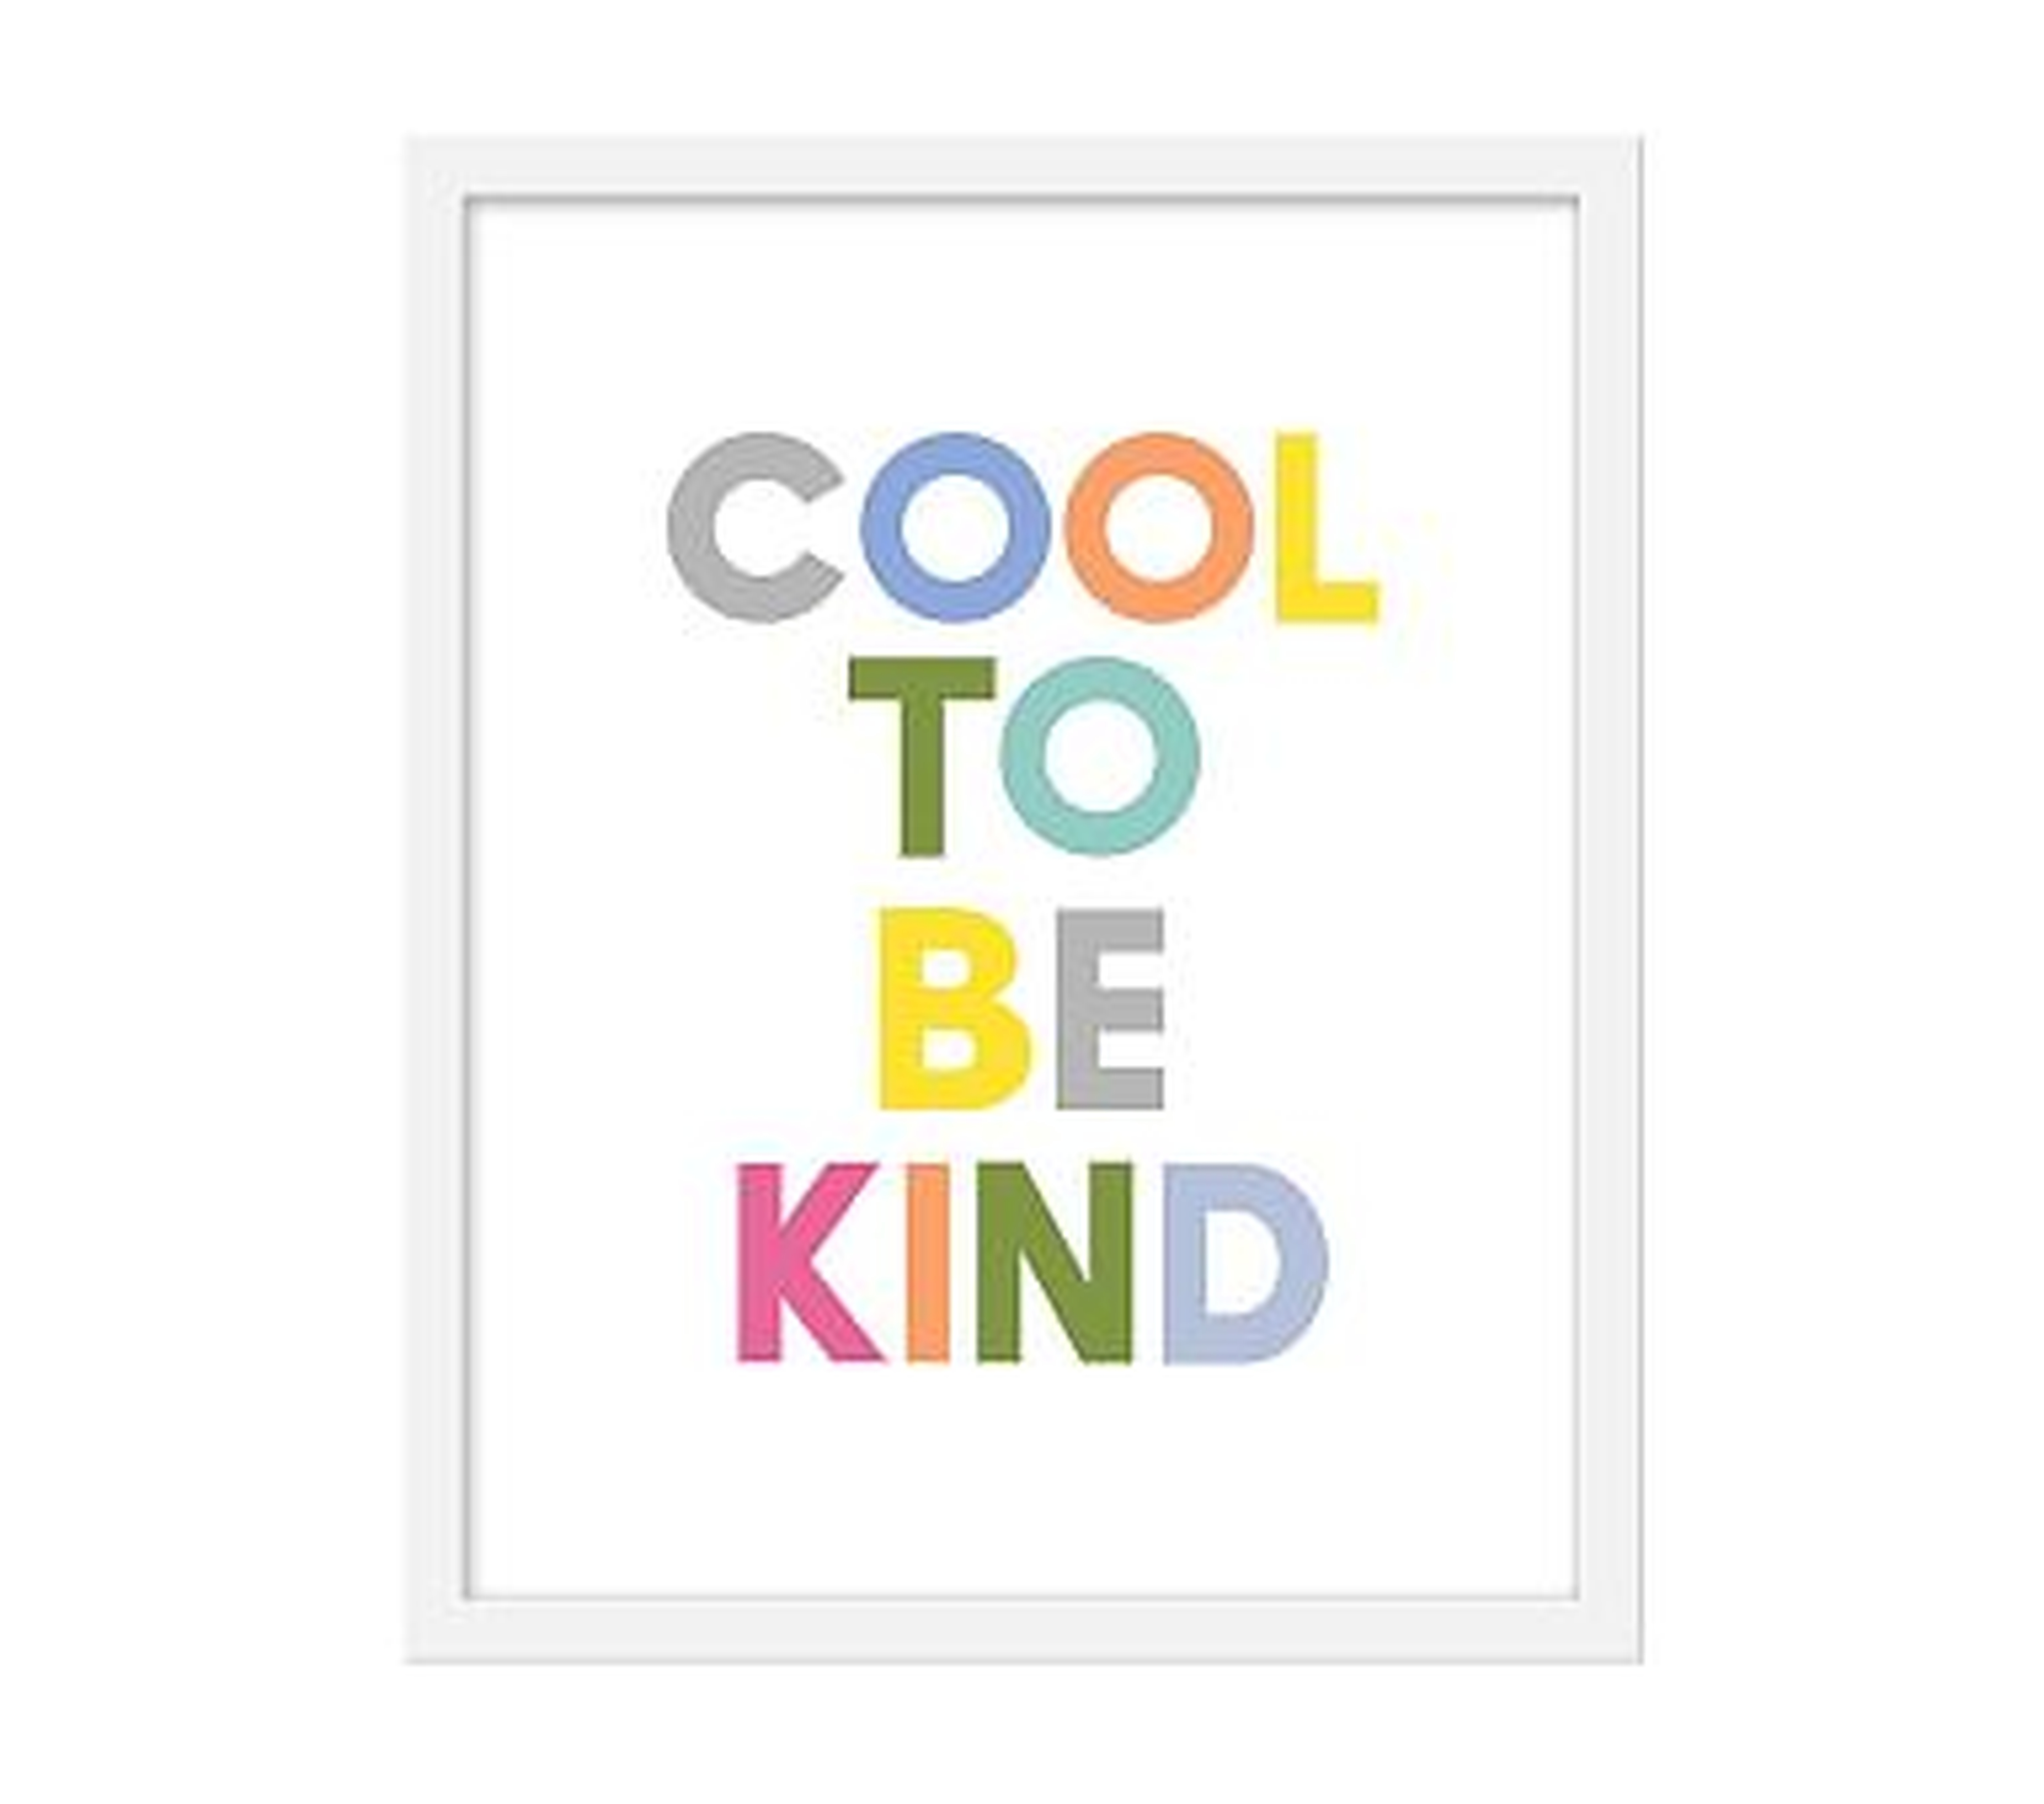 Cool To Be Kind White, 17x21, White Frame - Pottery Barn Kids